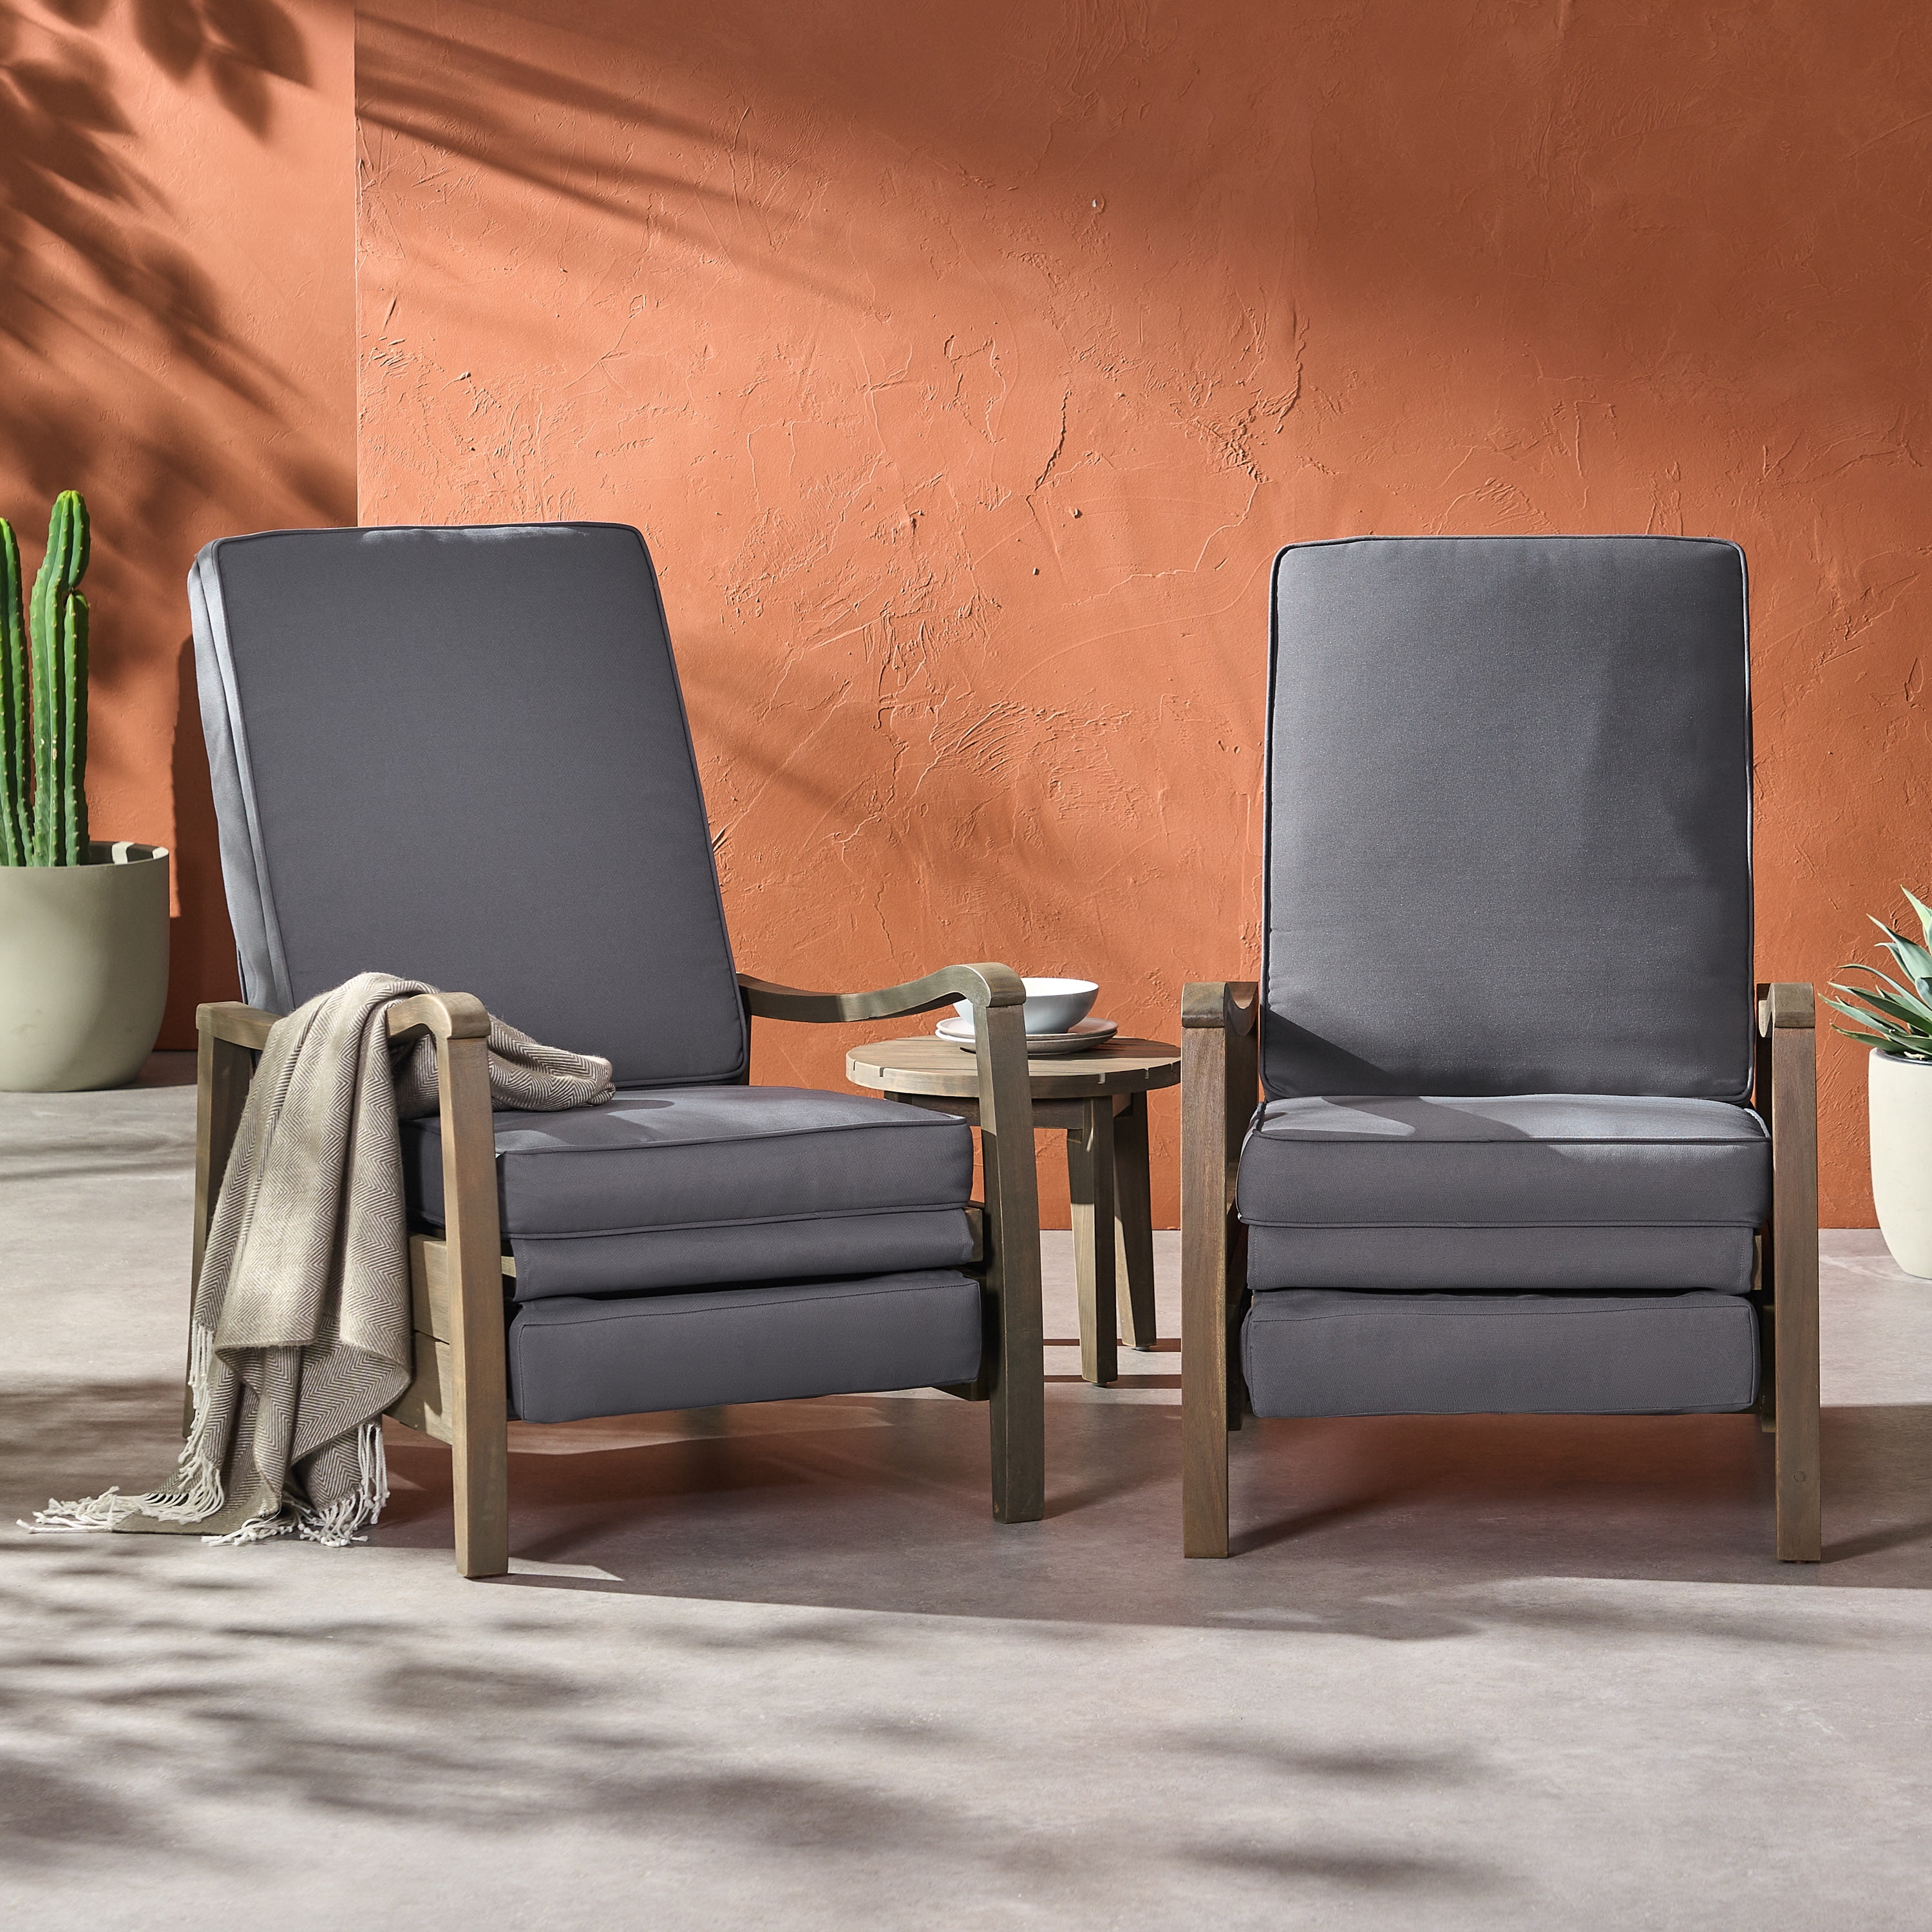 Finethy Acacia Wood Outdoor Recliner Chair with Cushions, Set of 2, Gray and Dark Gray